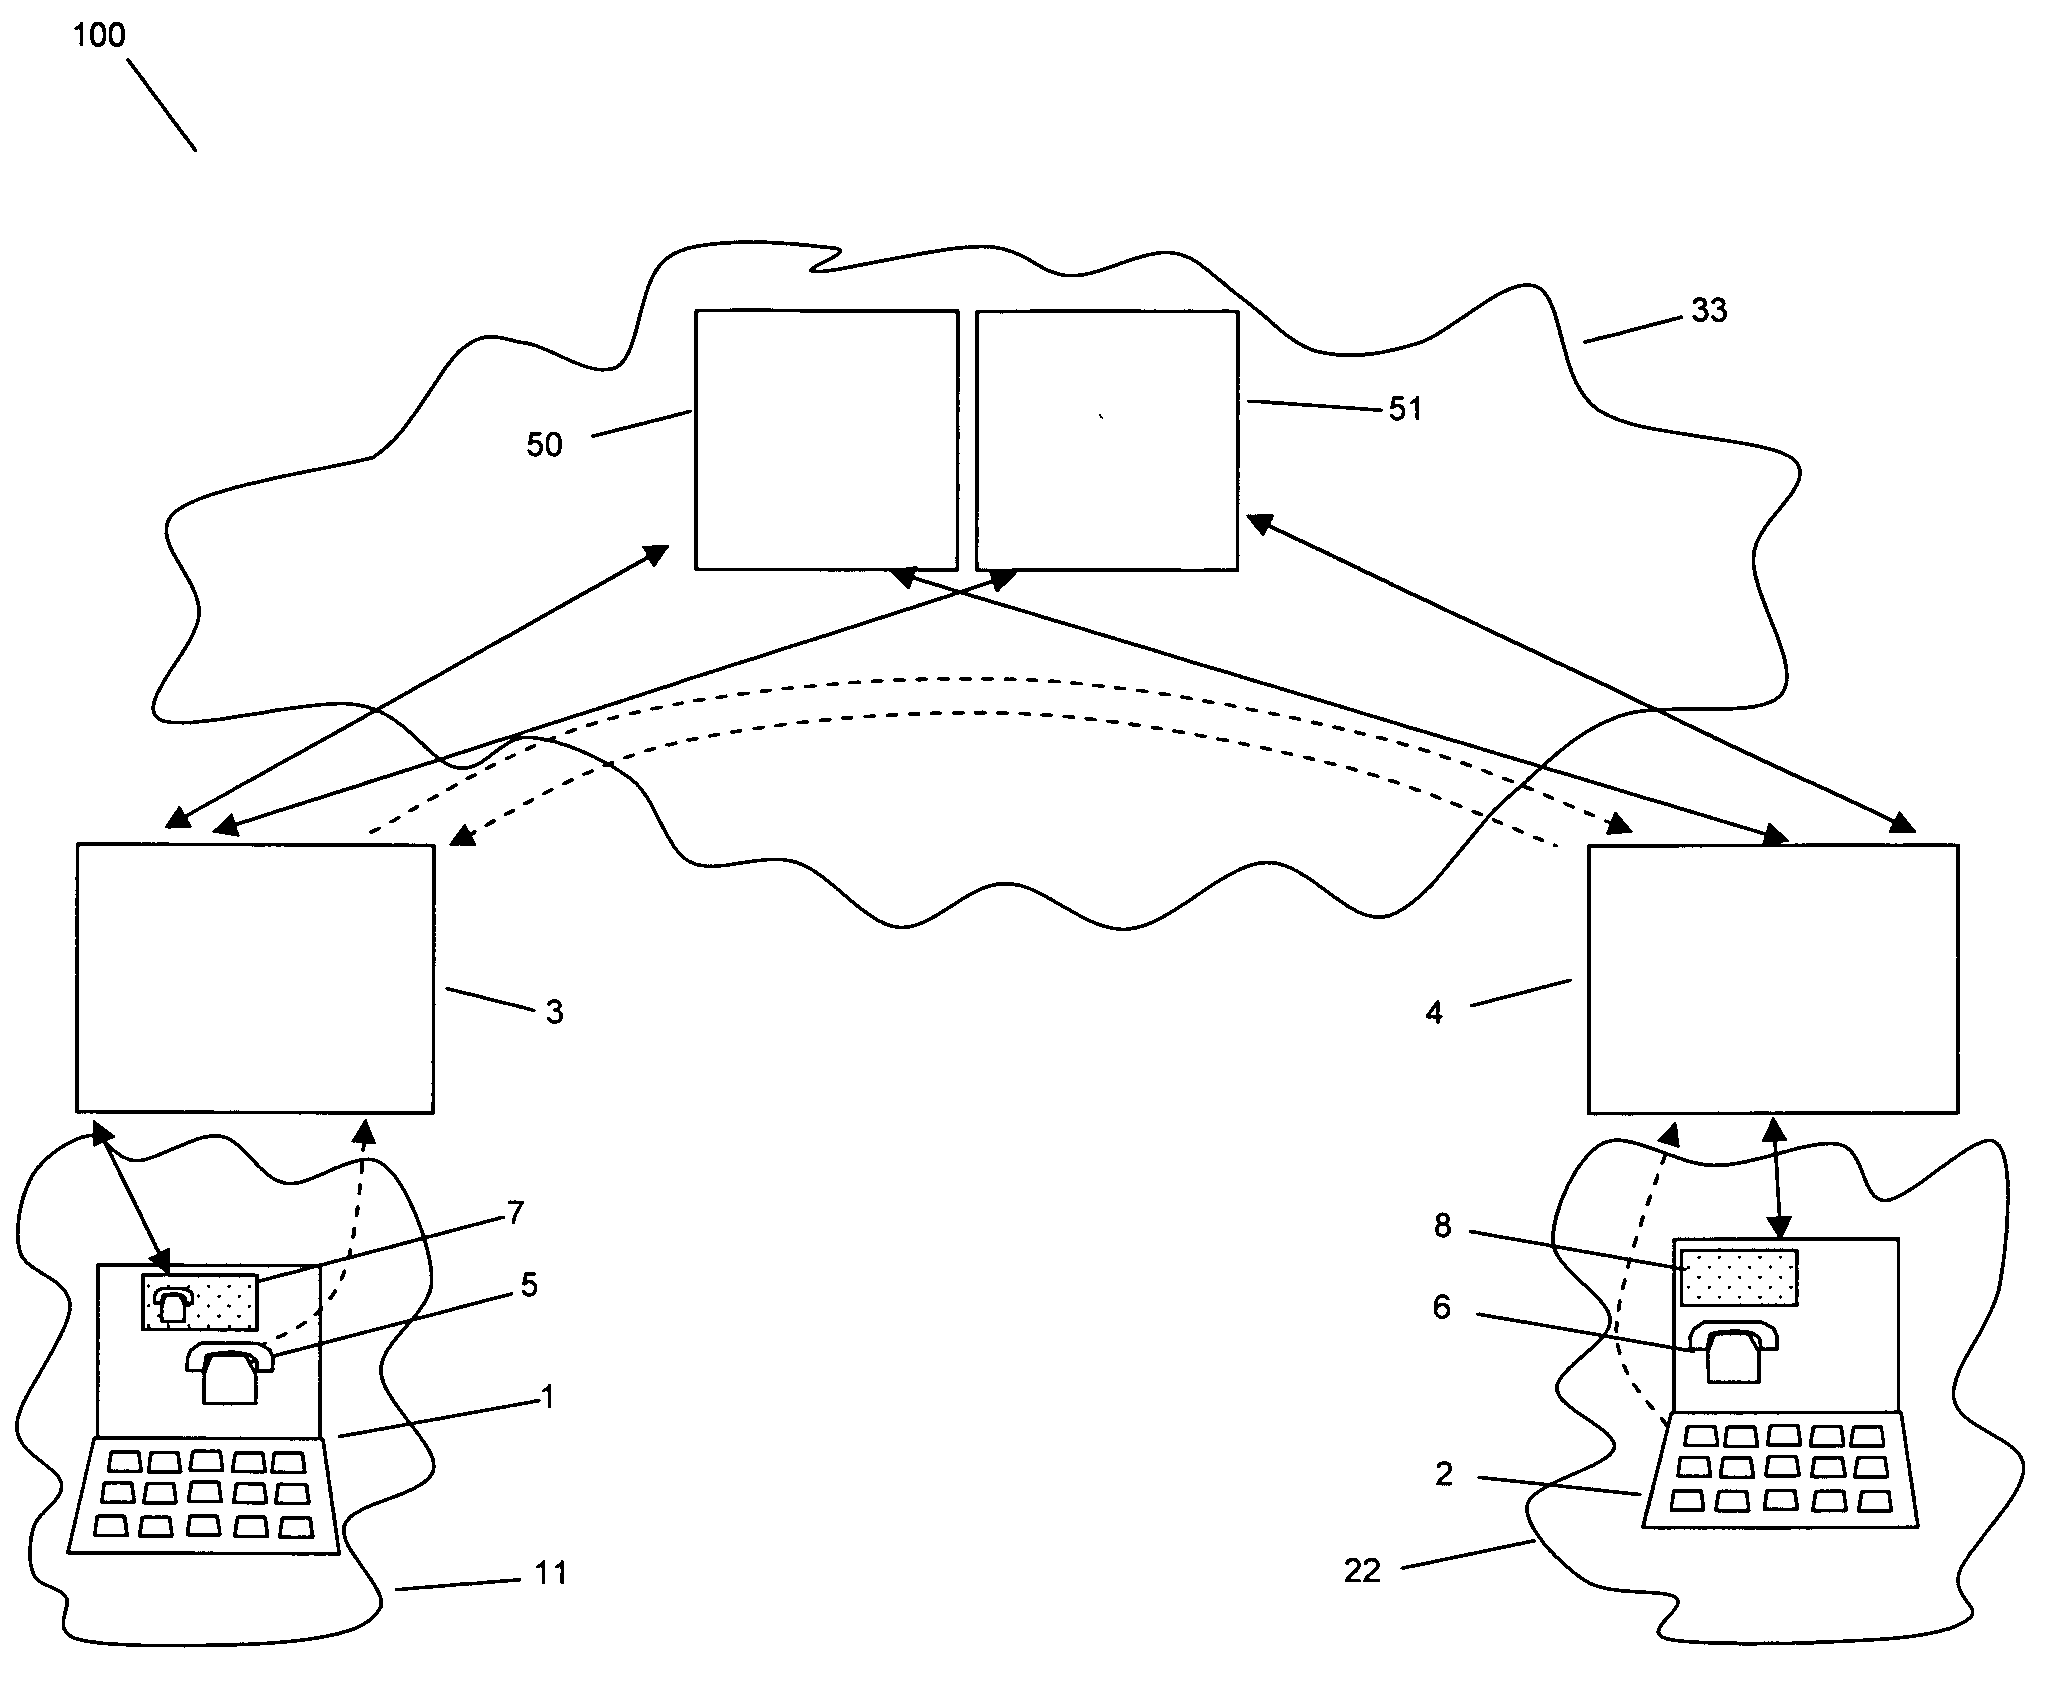 Method for the initiation of a shared computer session